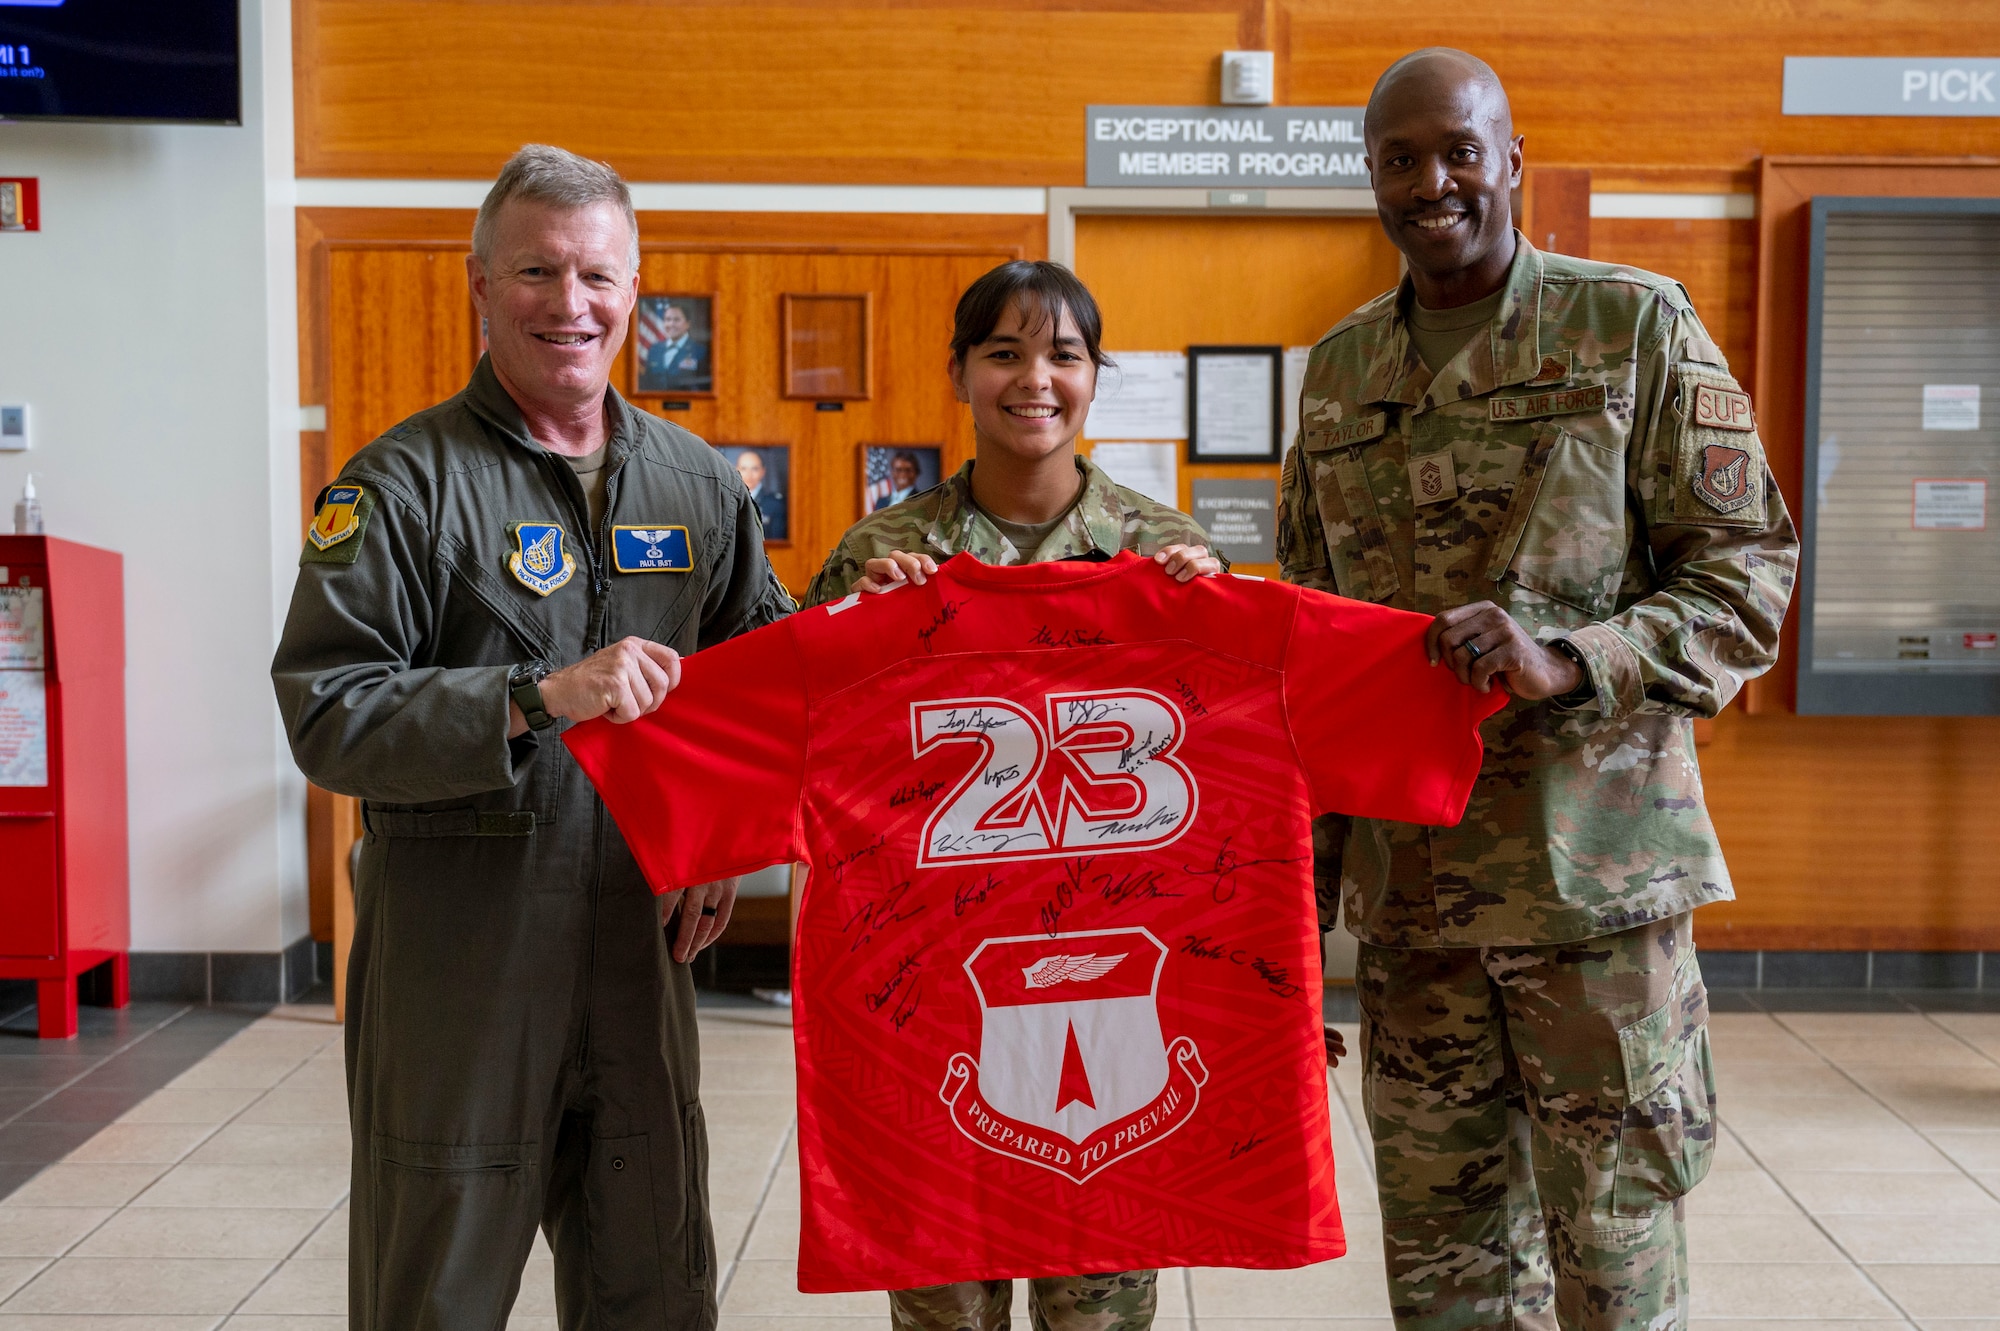 U.S. Air Force Senior Airman Alexandra Santos, dental prophylaxis technician assigned to the 36th Occupational Medical Readiness Squadron, receives the Linebacker of the Week Award from U.S. Air Force Brig. Gen. Paul Fast, commander of the 36th Wing, and U.S. Air Force Chief Master Sgt. Nicholas Taylor, the command chief of the 36th Wing, at Andersen Air Force Base, Guam, June 7, 2023. The Team Andersen Linebacker of the Week recognizes outstanding enlisted, officer, civilian and total force personnel who have had an impact on achieving Team Andersen’s mission, vision and priorities. (U.S. Air Force photo by Airman 1st Class Emily Saxton)